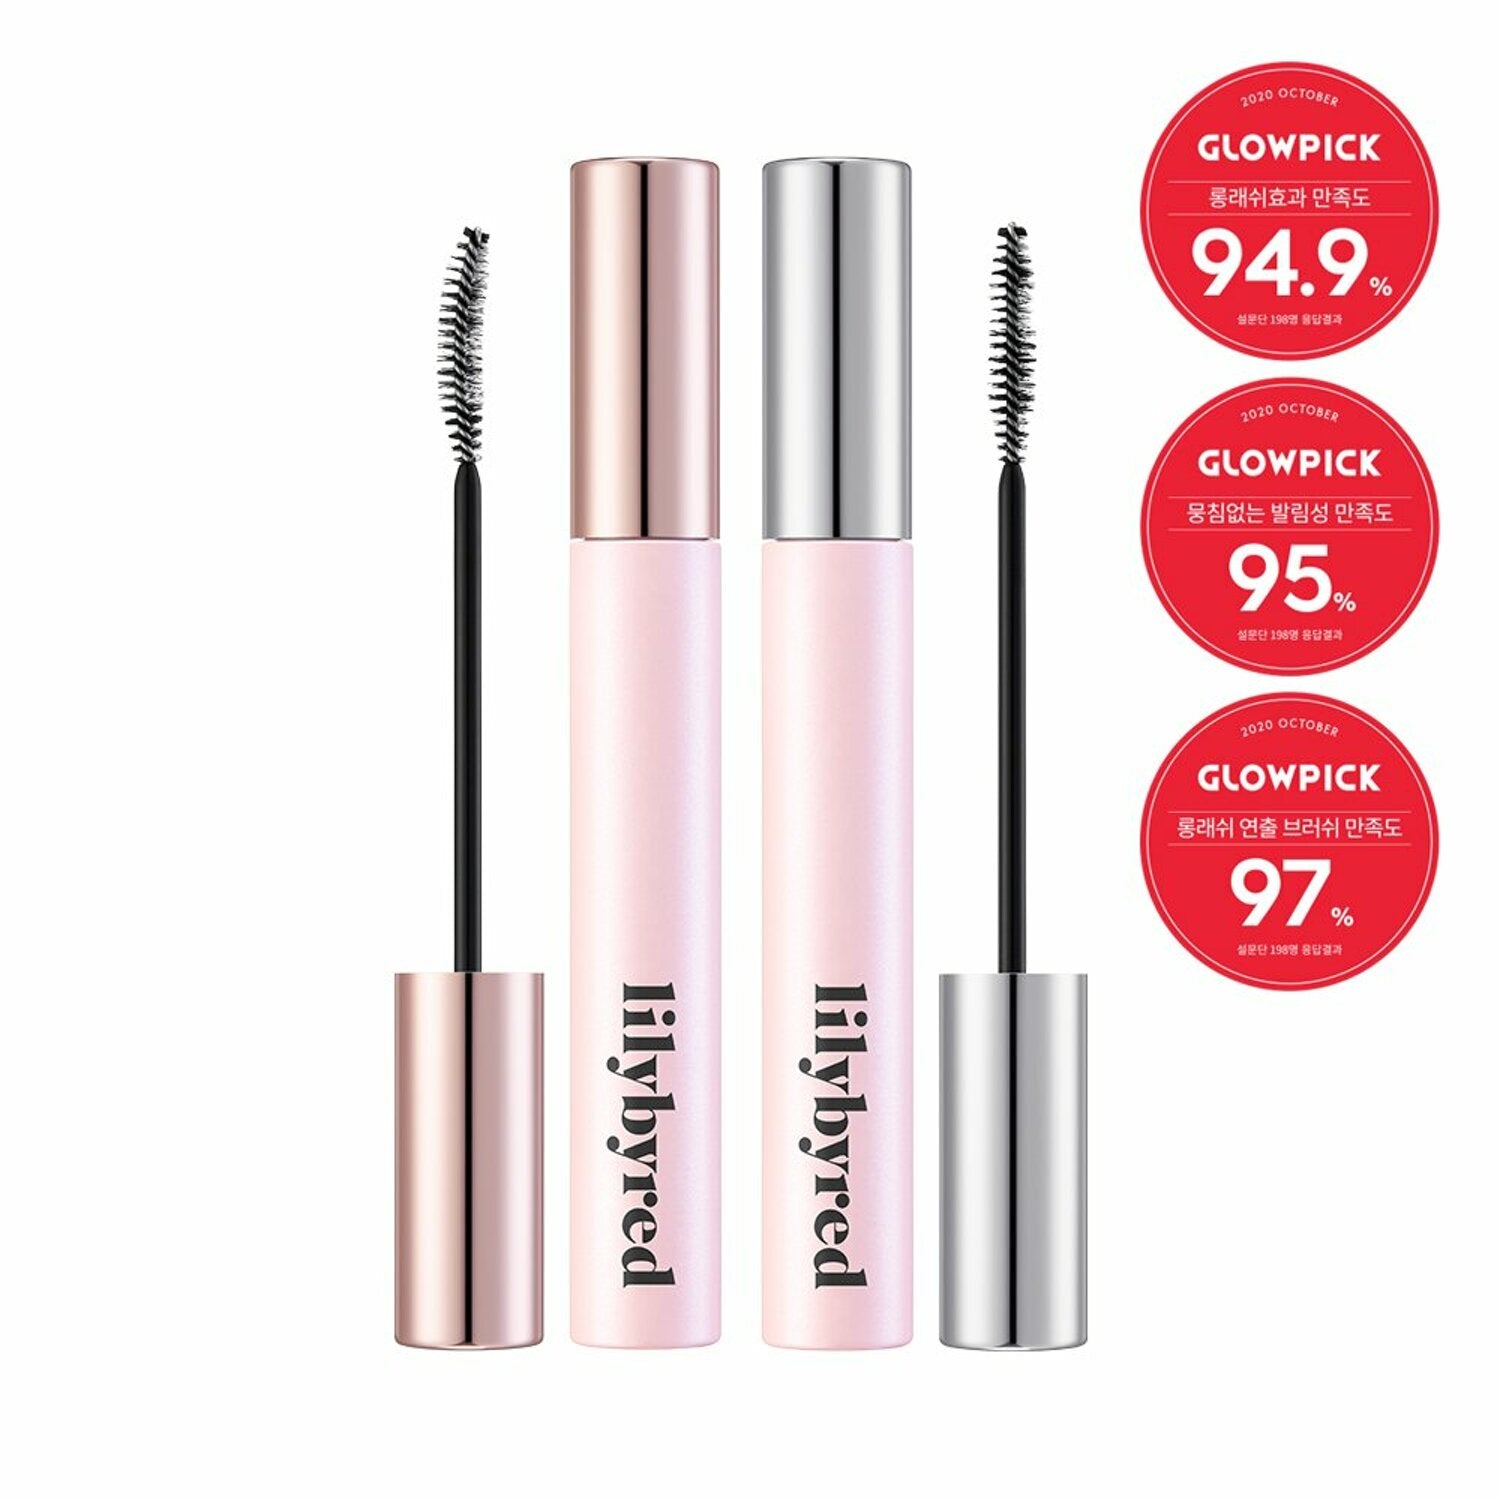 Achieve stunning lashes with the lilybyred Am 9 To Pm 9 Infinite Mascara 7g.